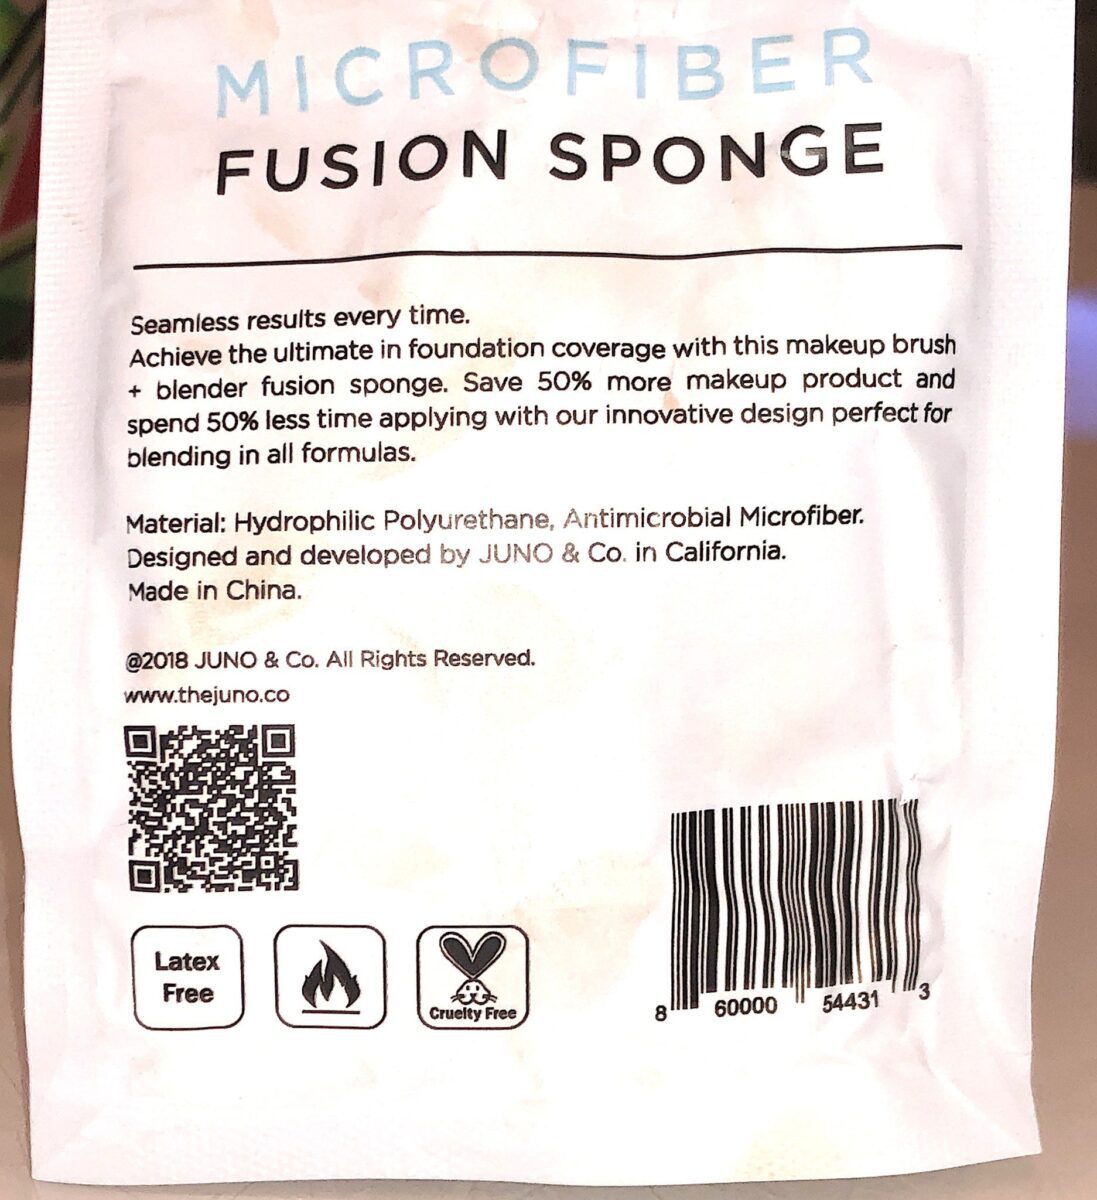 THE INGREDIENTS FOR THE MICROFIBER FUSION SPONGES